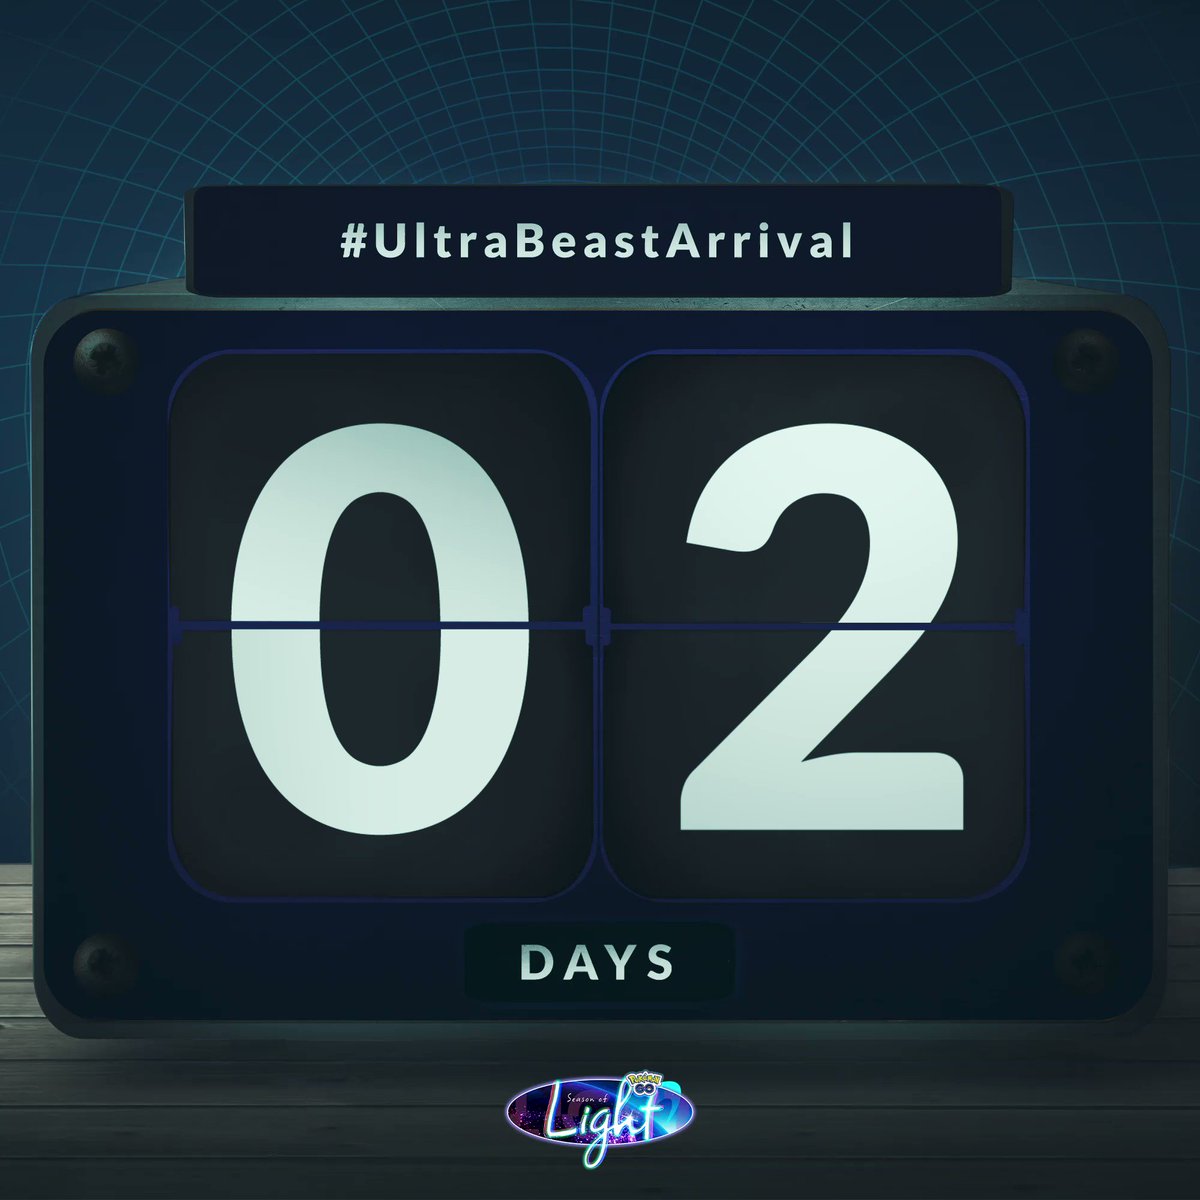 Pokémon GO on X: ⚠️ Ultra Beast Alert ⚠️ #UltraBeastArrival is real. There  is no stopping it. Preparedness is key. Tag a friend in the comments to  ensure they're not caught unawares